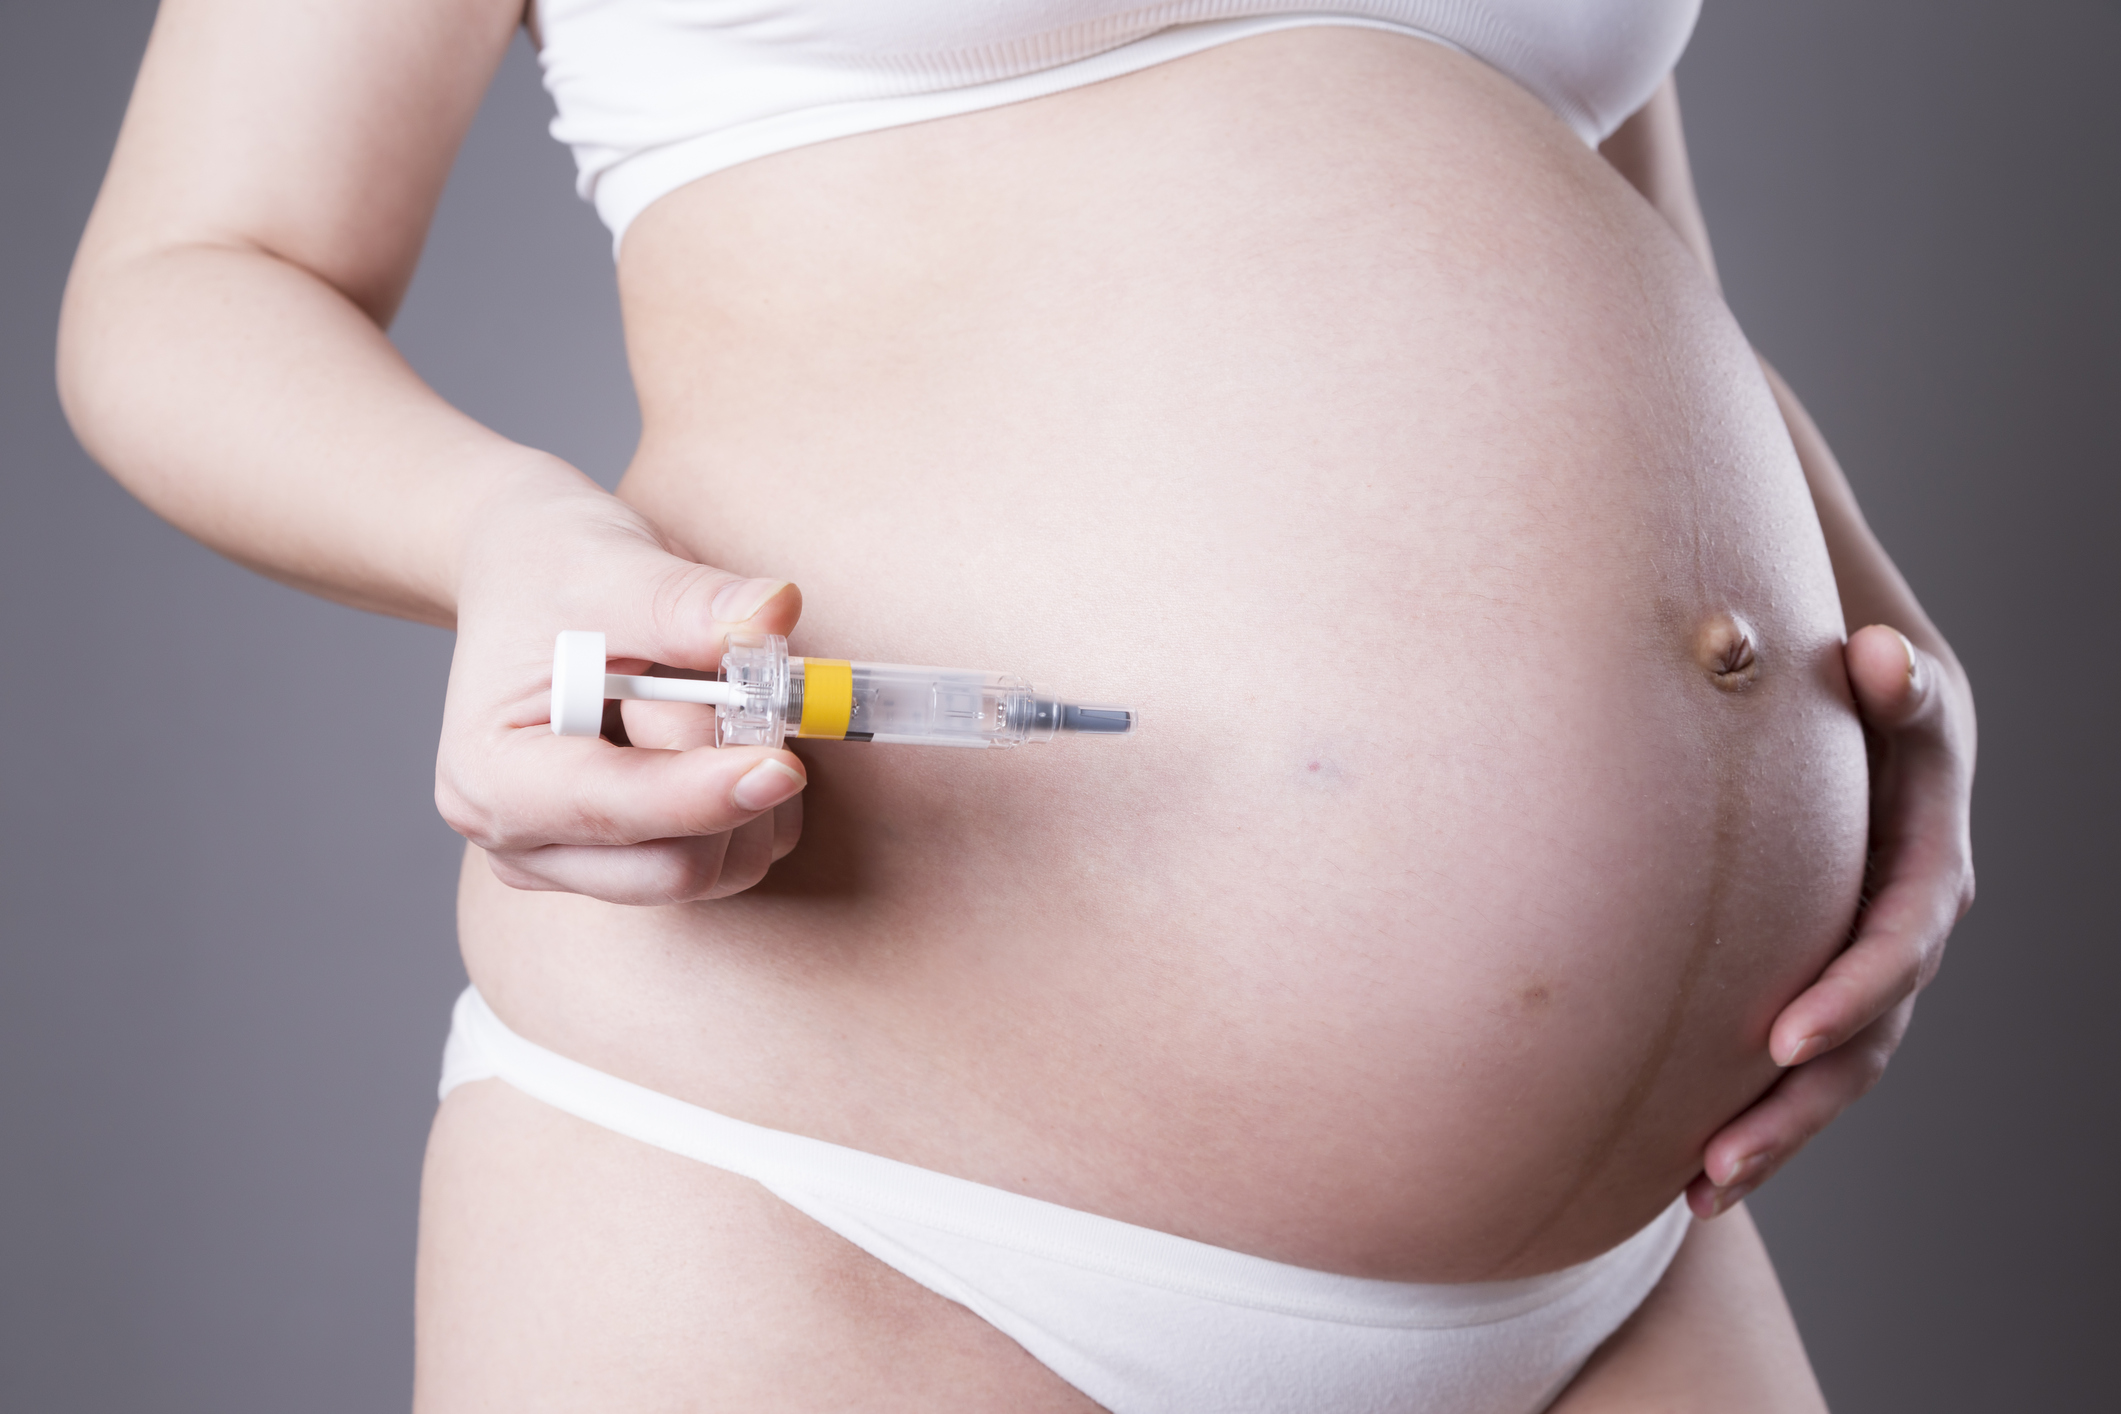 Young pregnant woman making injection in the stomach. Close-up studio shot on a gray background